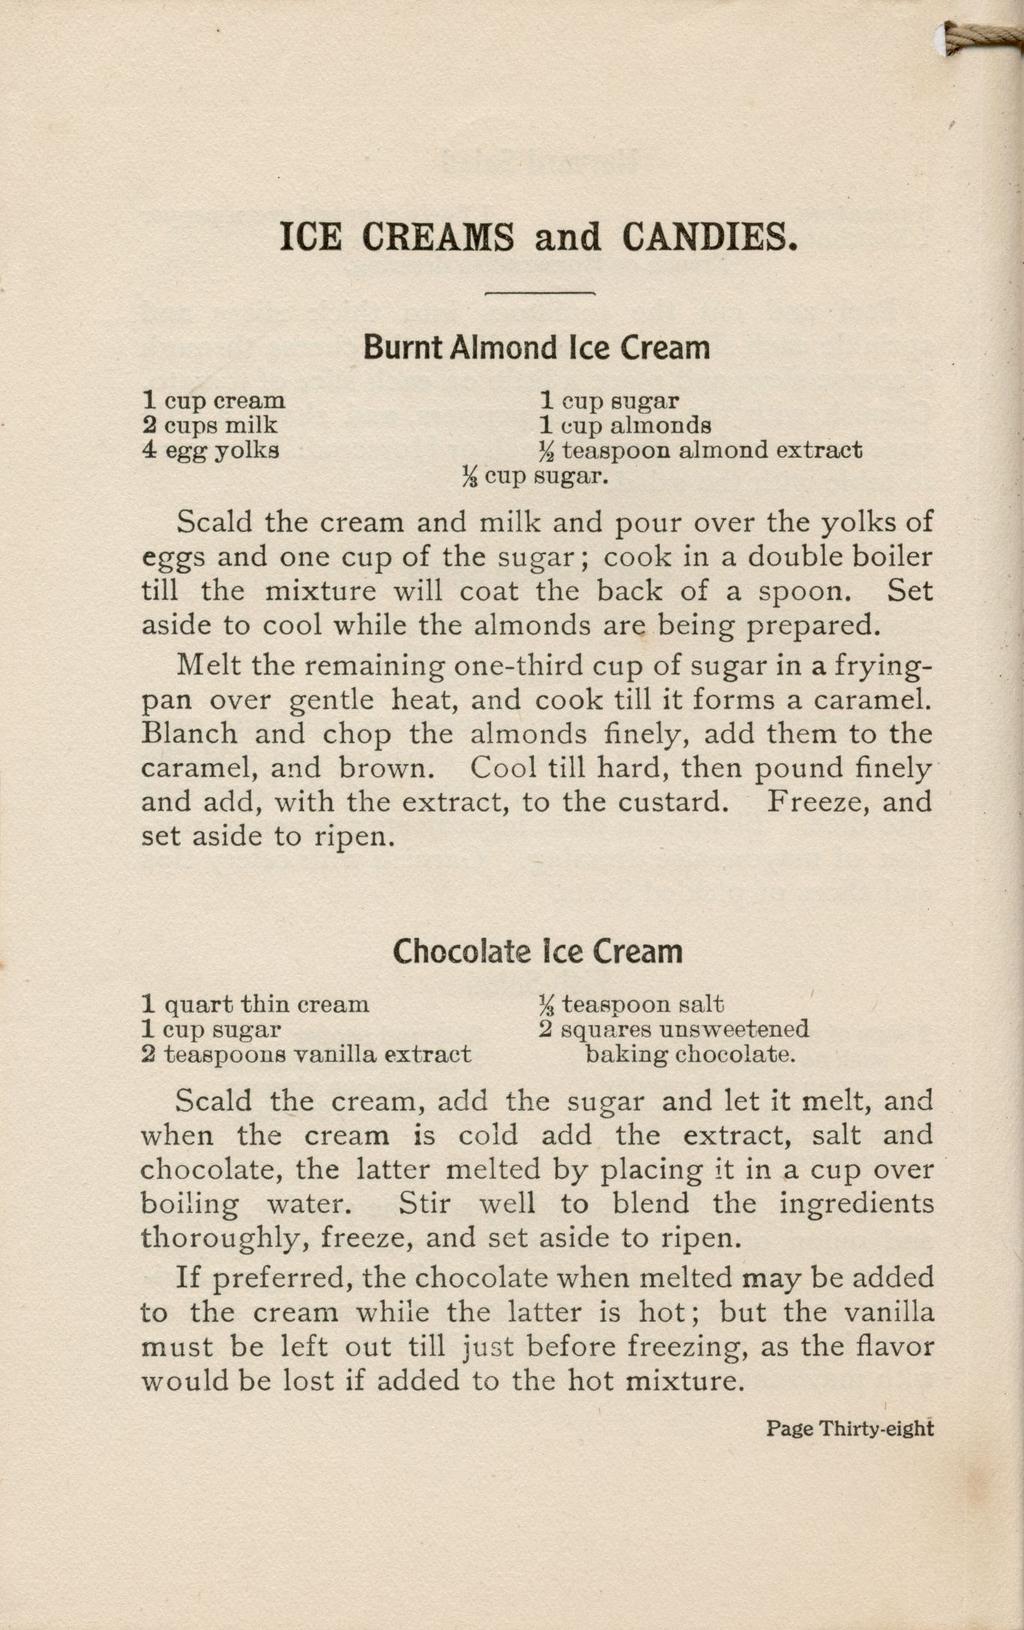 I^ì ICE CREAMS and CANDIES. 1 cup cream 2 cups milk 4 egg yolks Burnt Almond Ice Cream 1 cup sugar 1 cup almonds % teaspoon almond extract % cup sugar.